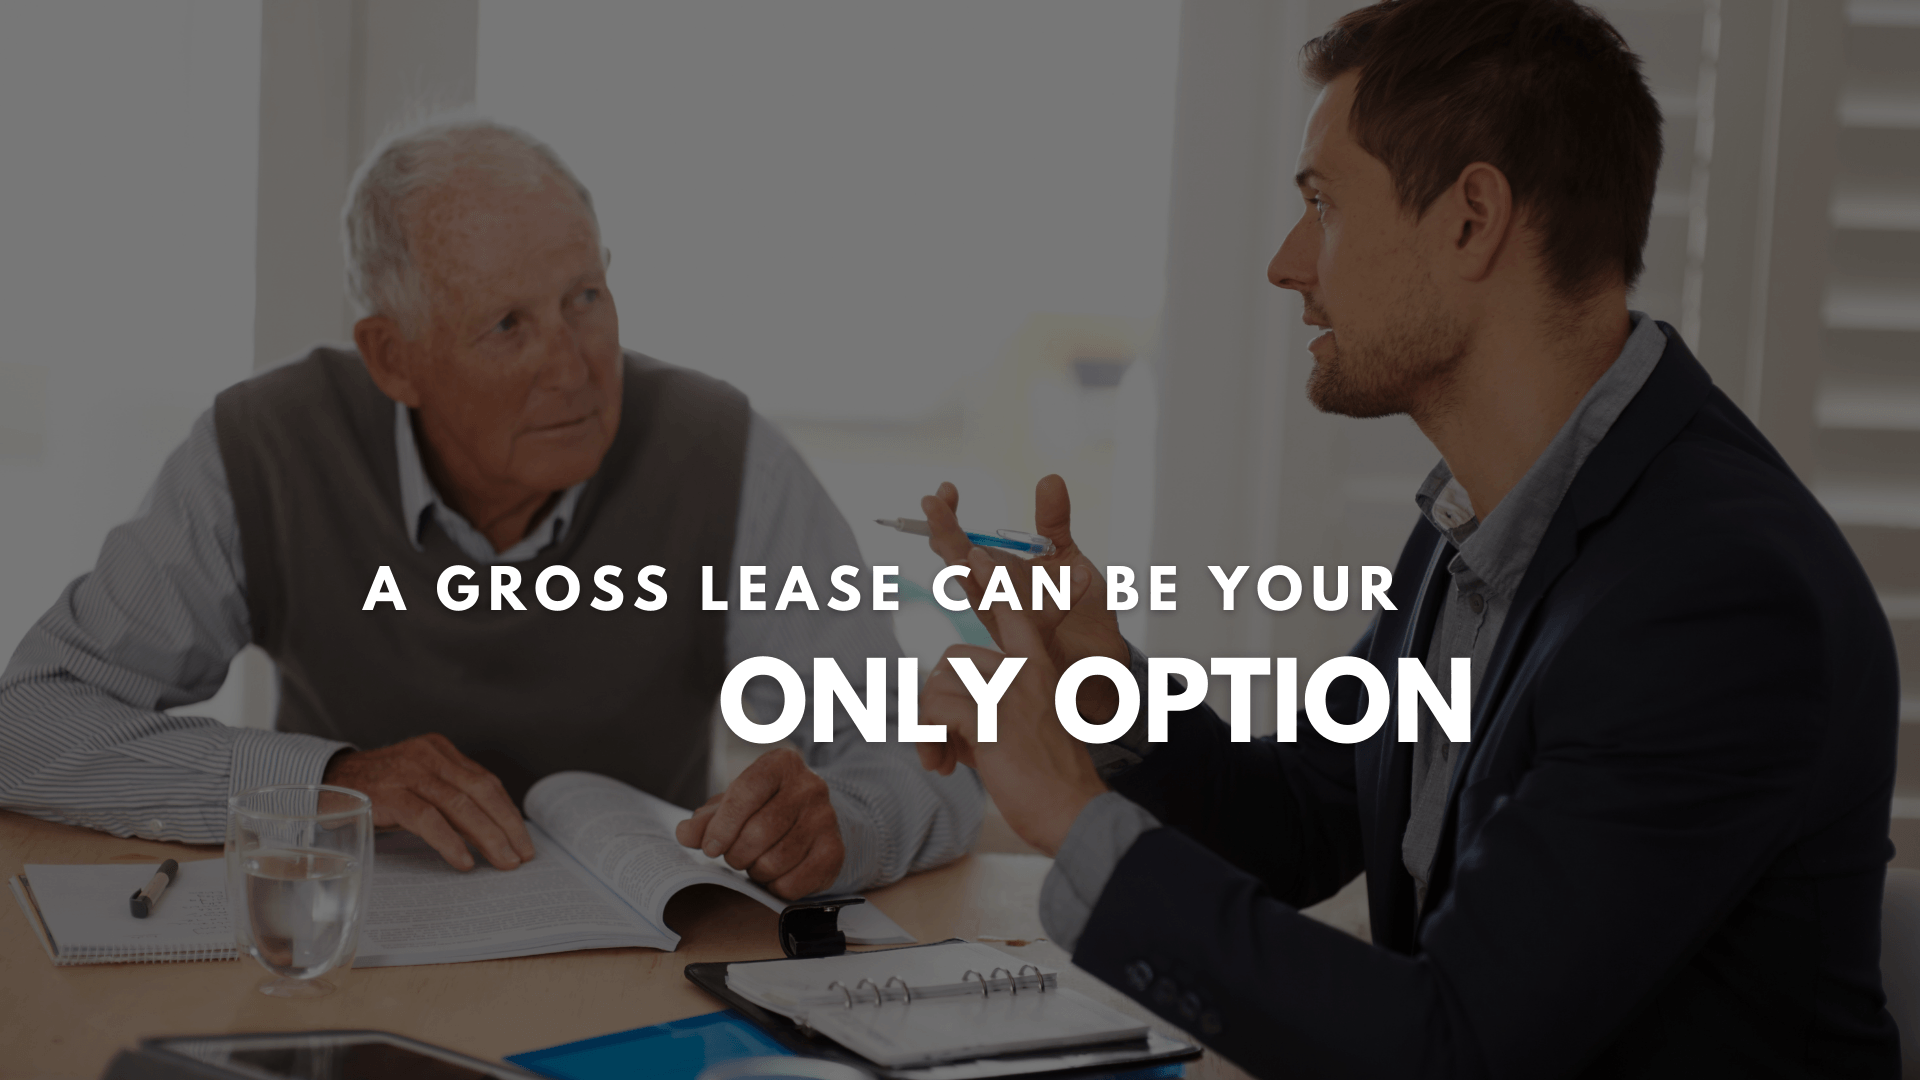 Two persons review the gross lease details